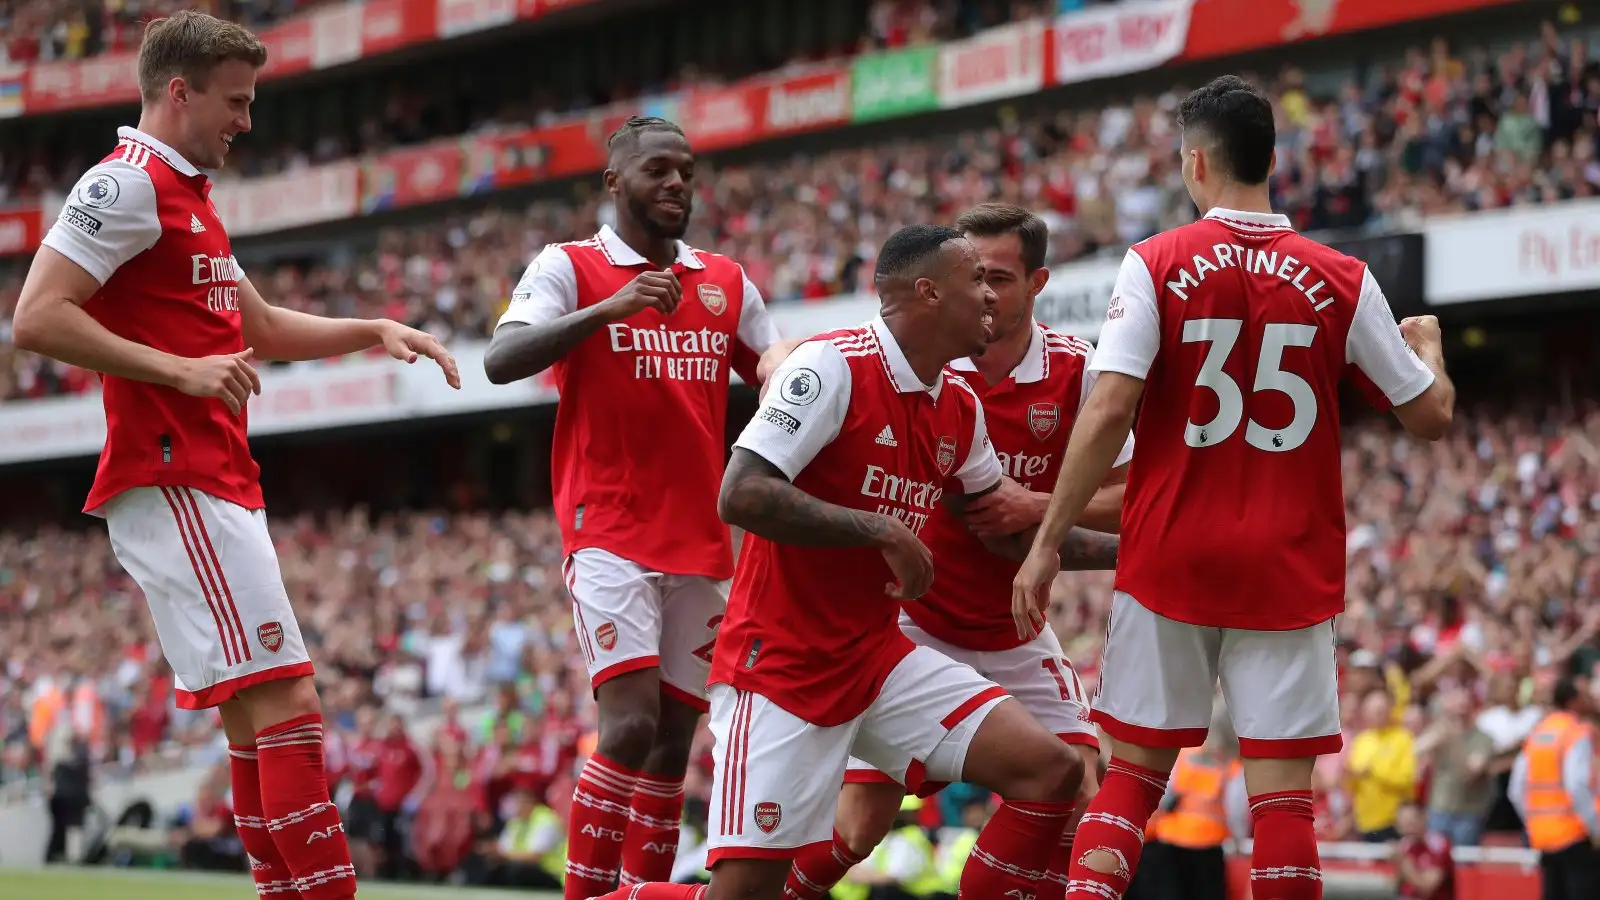 This club is definitely a social experiment' - Arsenal fans react